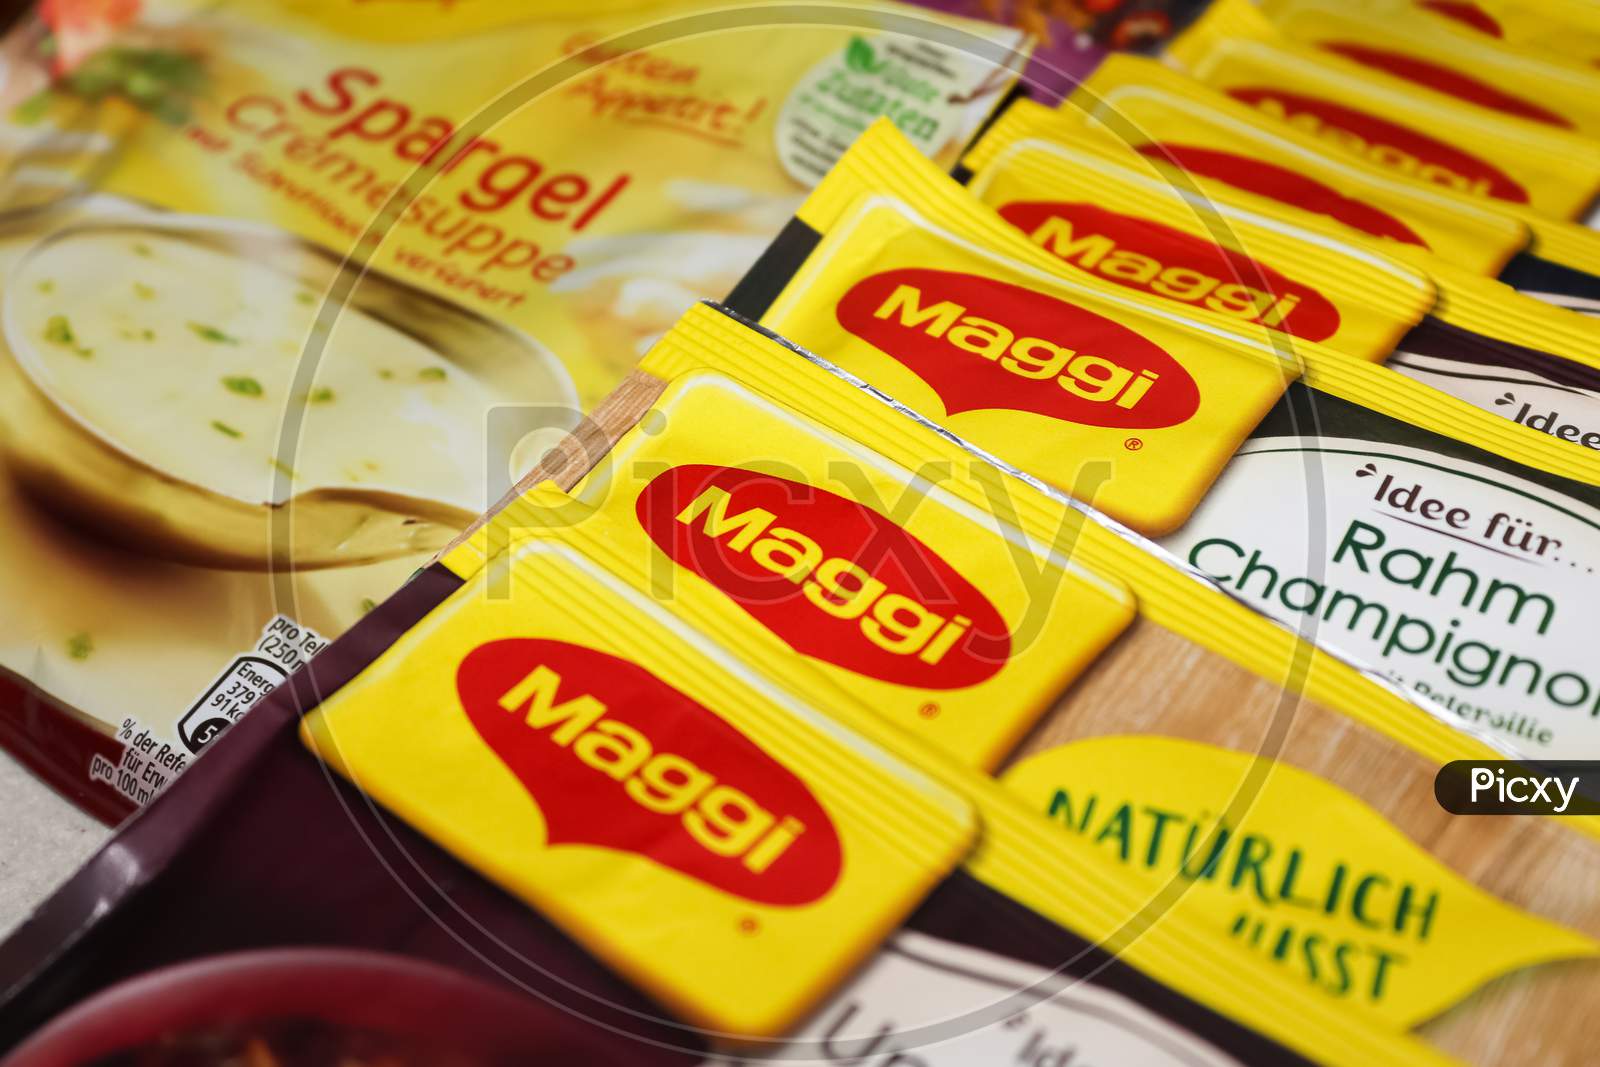 German Maggi Instant Sauce Packages, Owned By Nestle. Maggi Is An International Brand Of Soups, Stocks, Bouillon Cubes, Ketchup, Sauces, Seasonings And Instant Noodles.